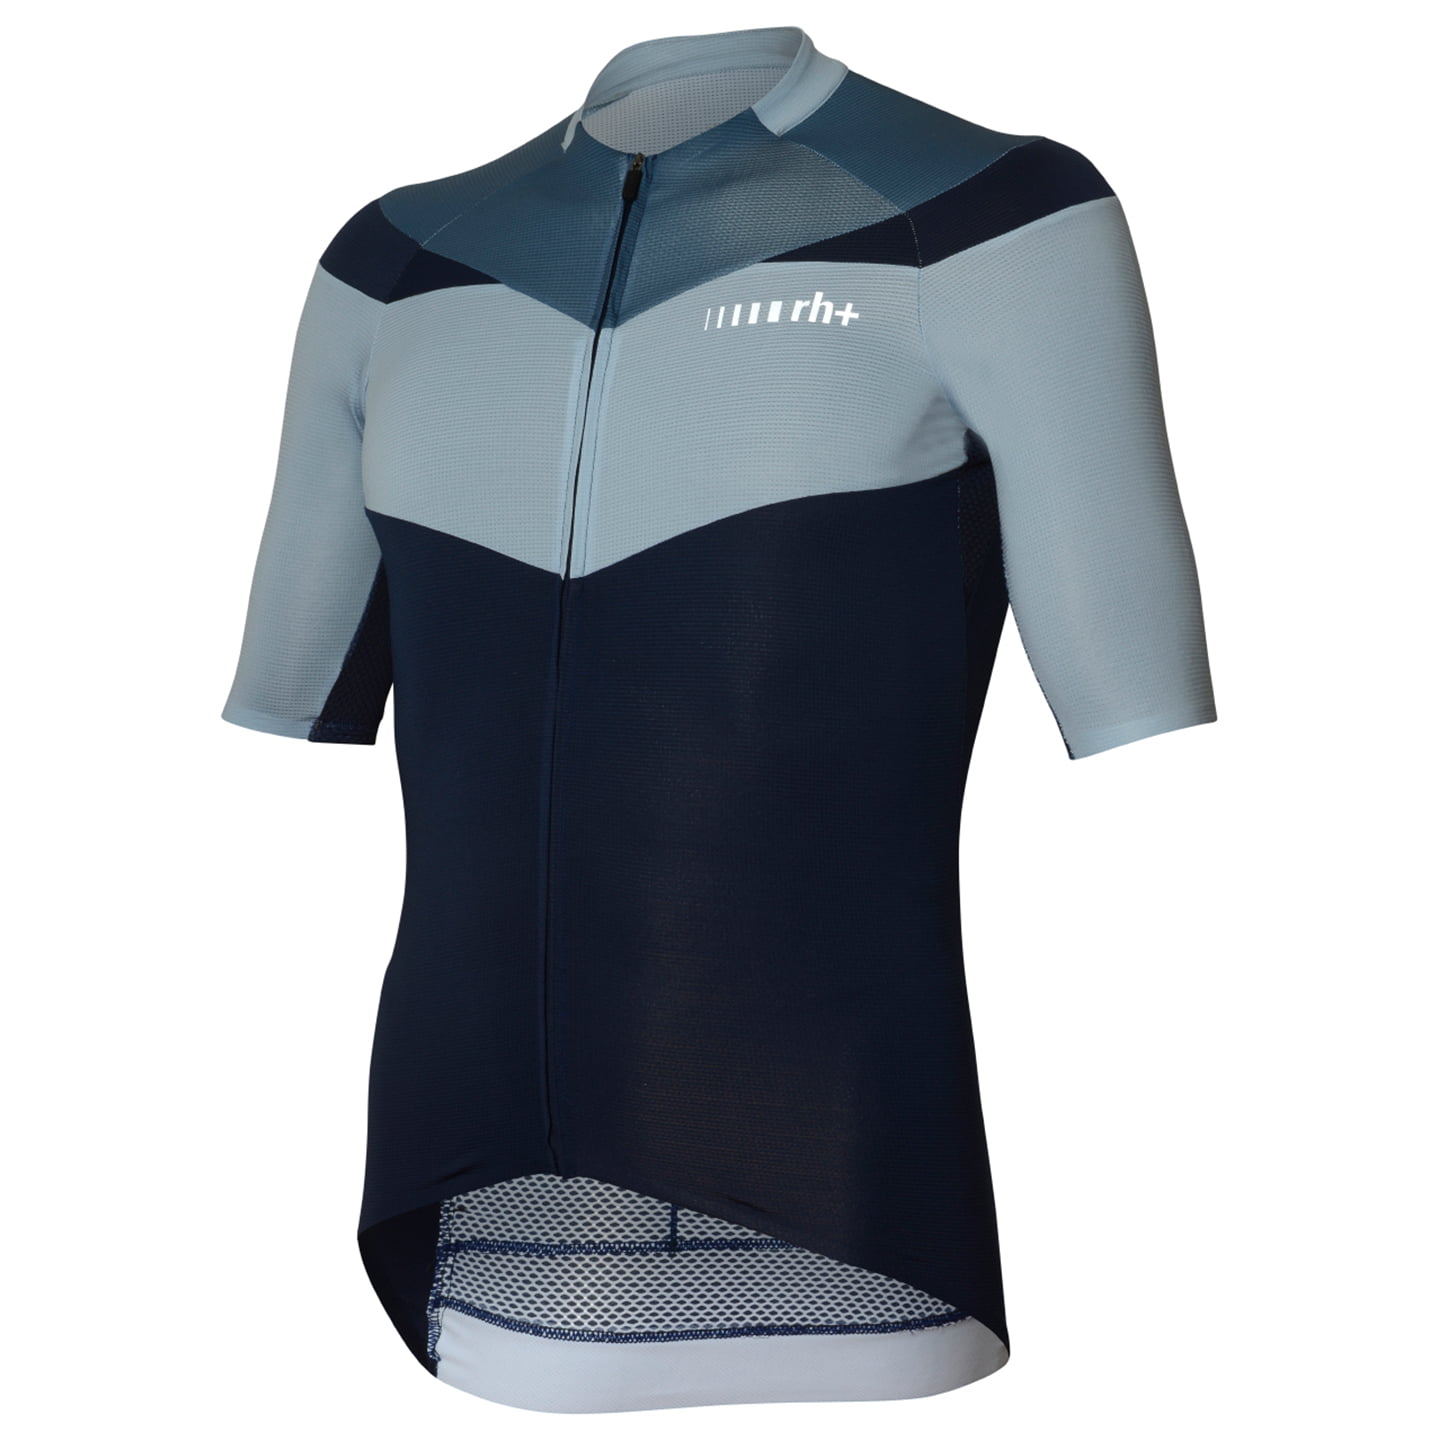 RH+ Team Short Sleeve Jersey Short Sleeve Jersey, for men, size 2XL, Cycling jersey, Cycle clothing